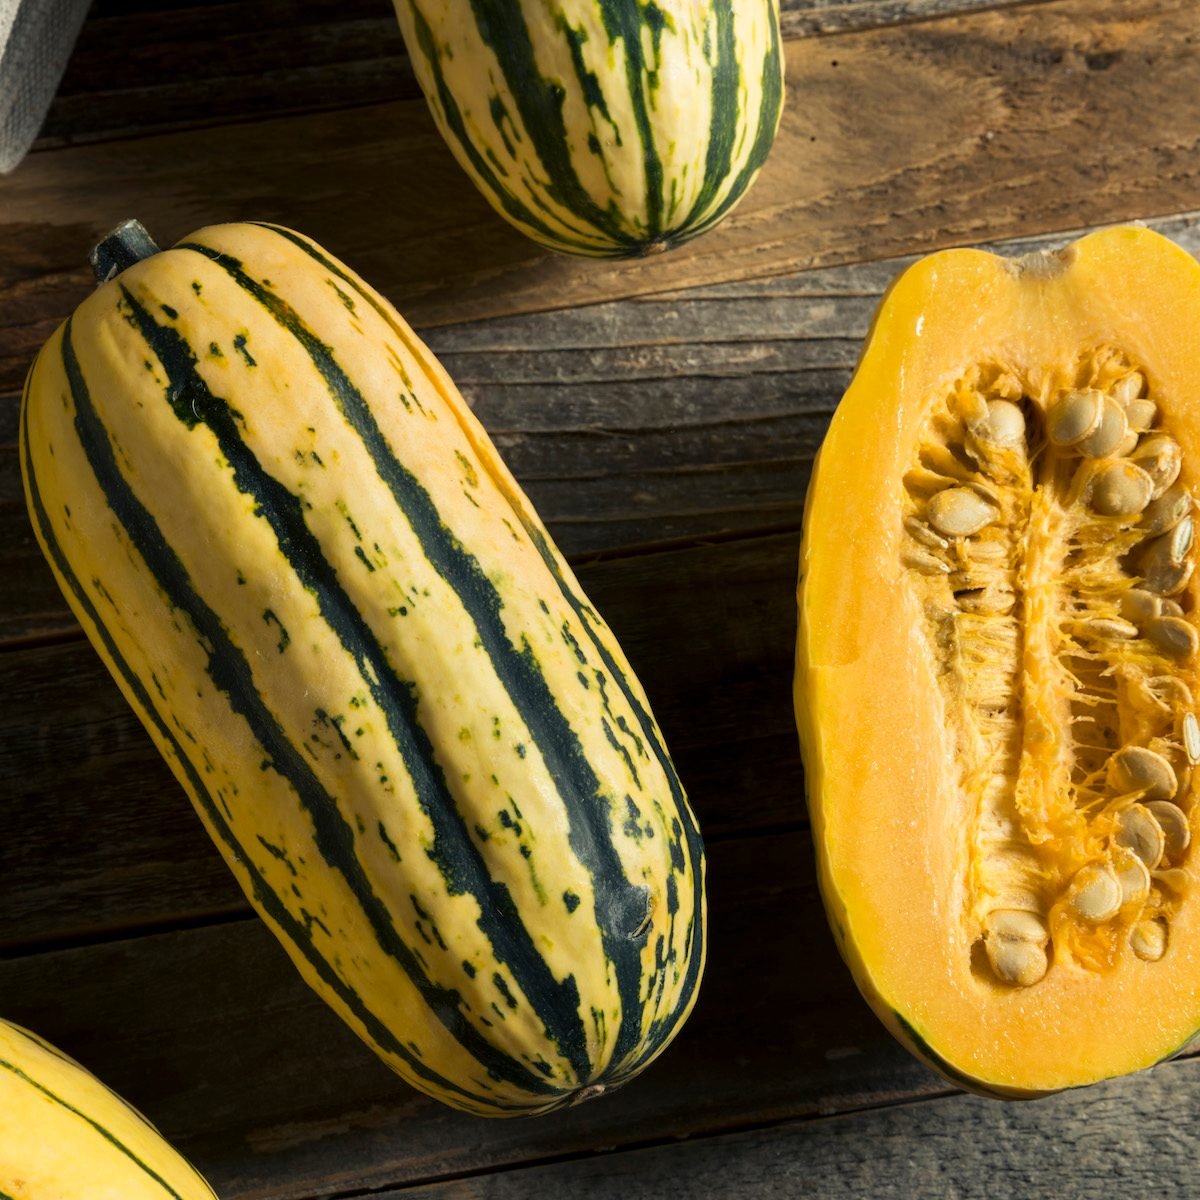 Two deliata squash—one whole and one sliced in half vertically.